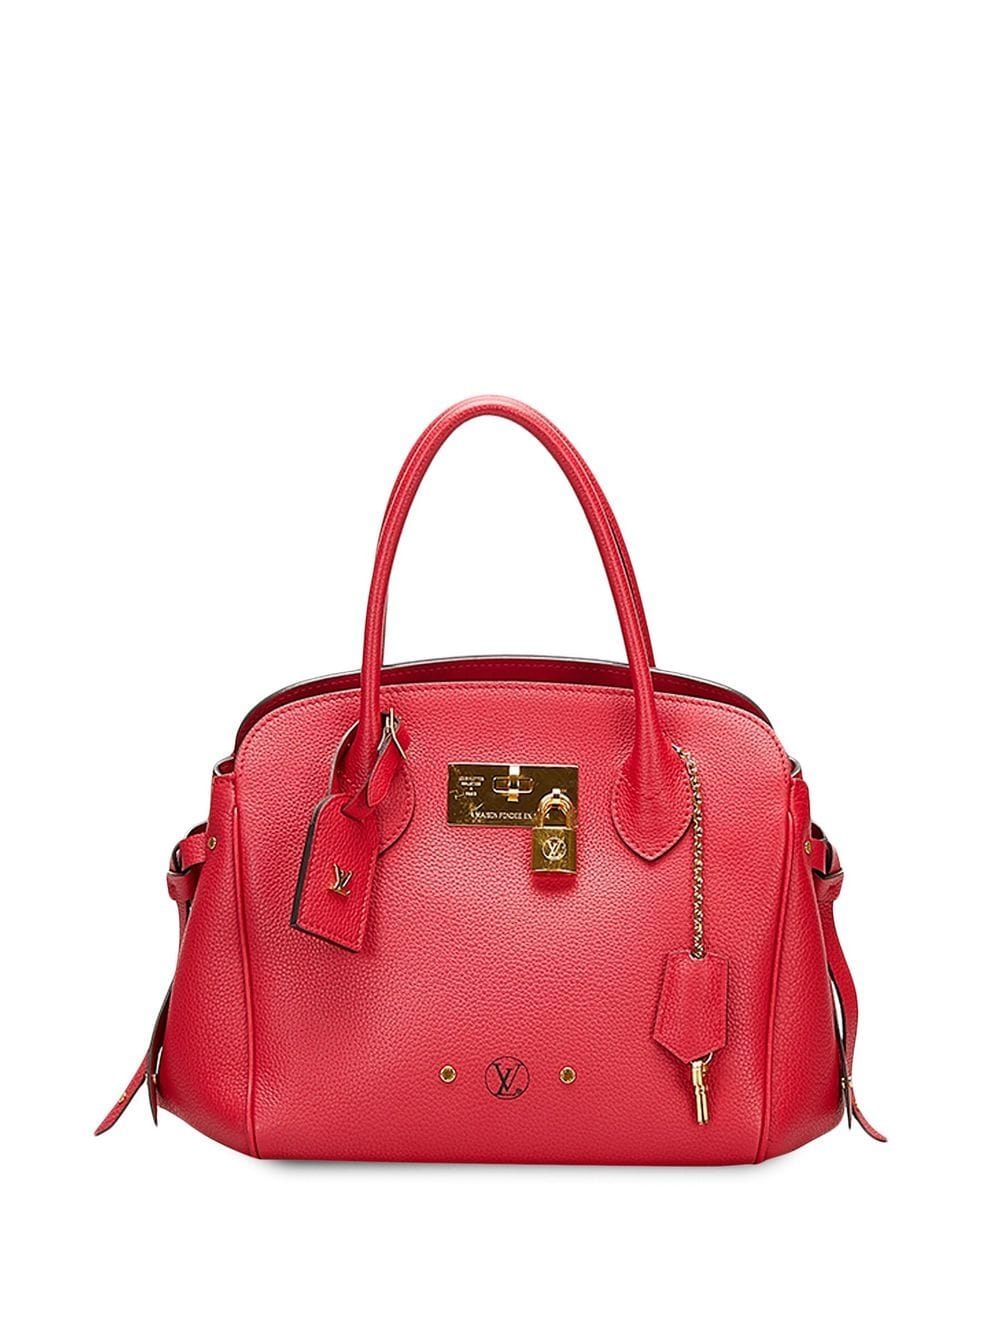 Louis Vuitton Pre-Owned 2019 Milla PM two-way bag - Red von Louis Vuitton Pre-Owned